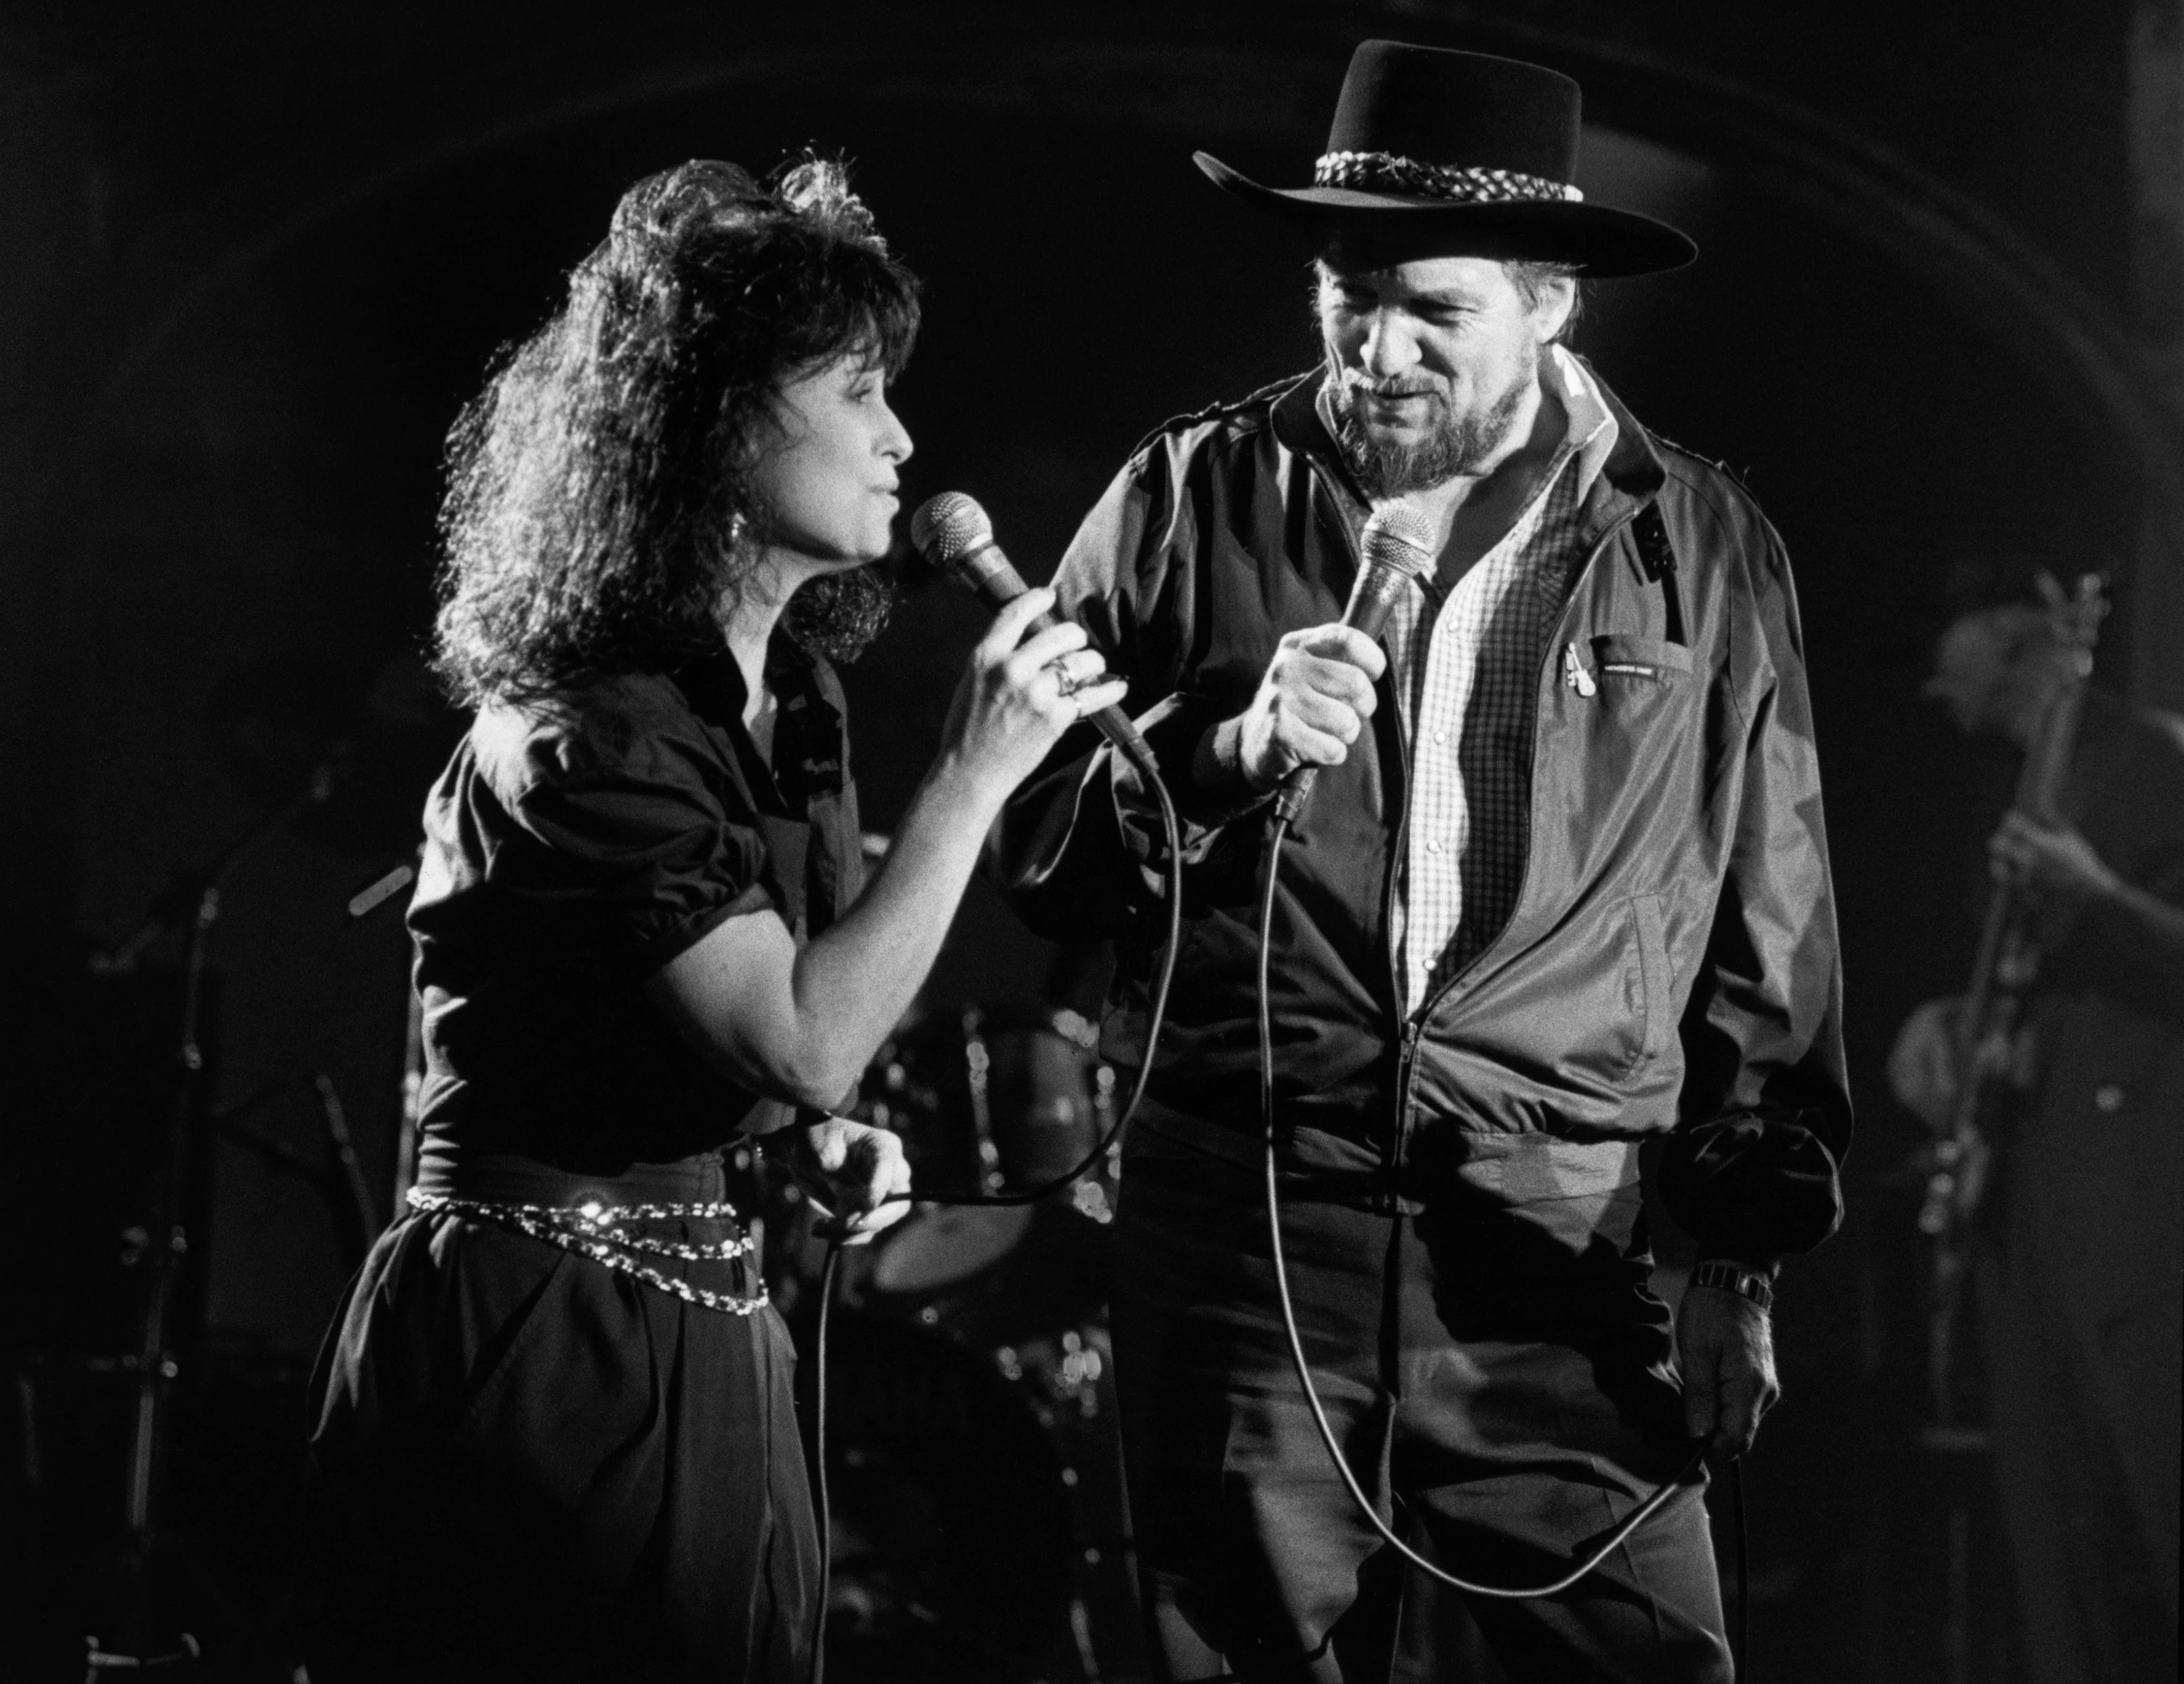  Jessi Colter and Waylon Jennings in January 1988 | Source: Getty Images